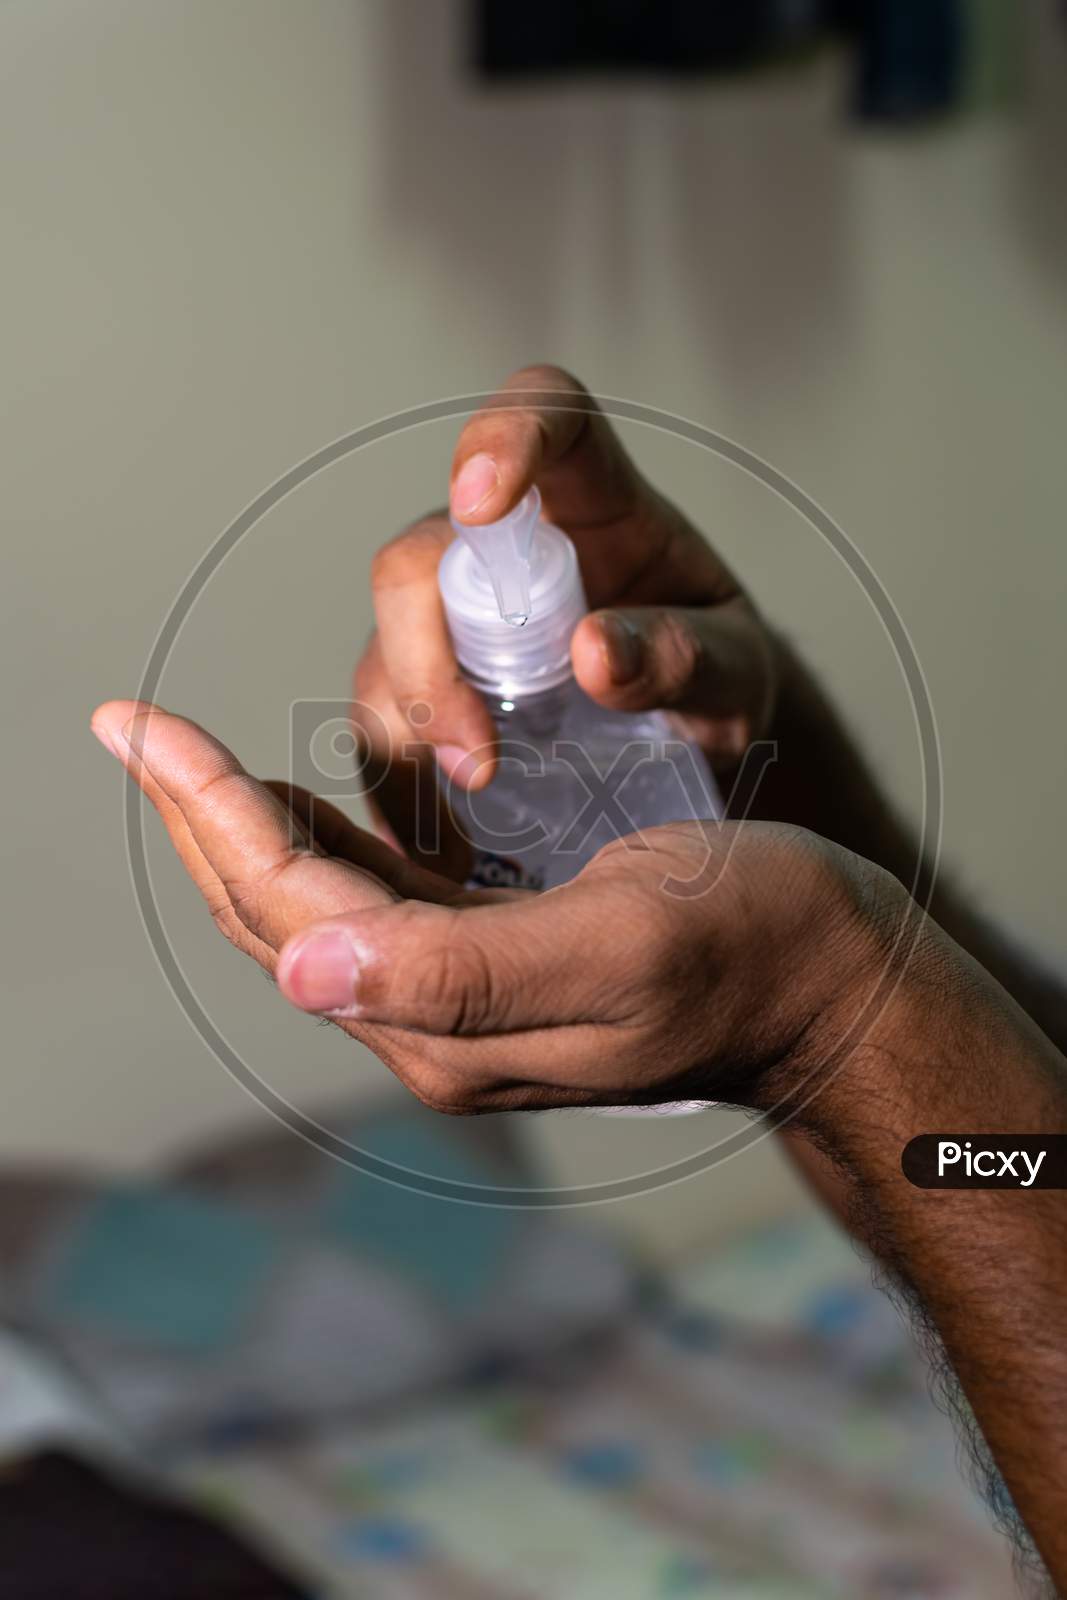 An Indian Man Taking Hand Sanitizer To His Hand To Prevent Corona Virus